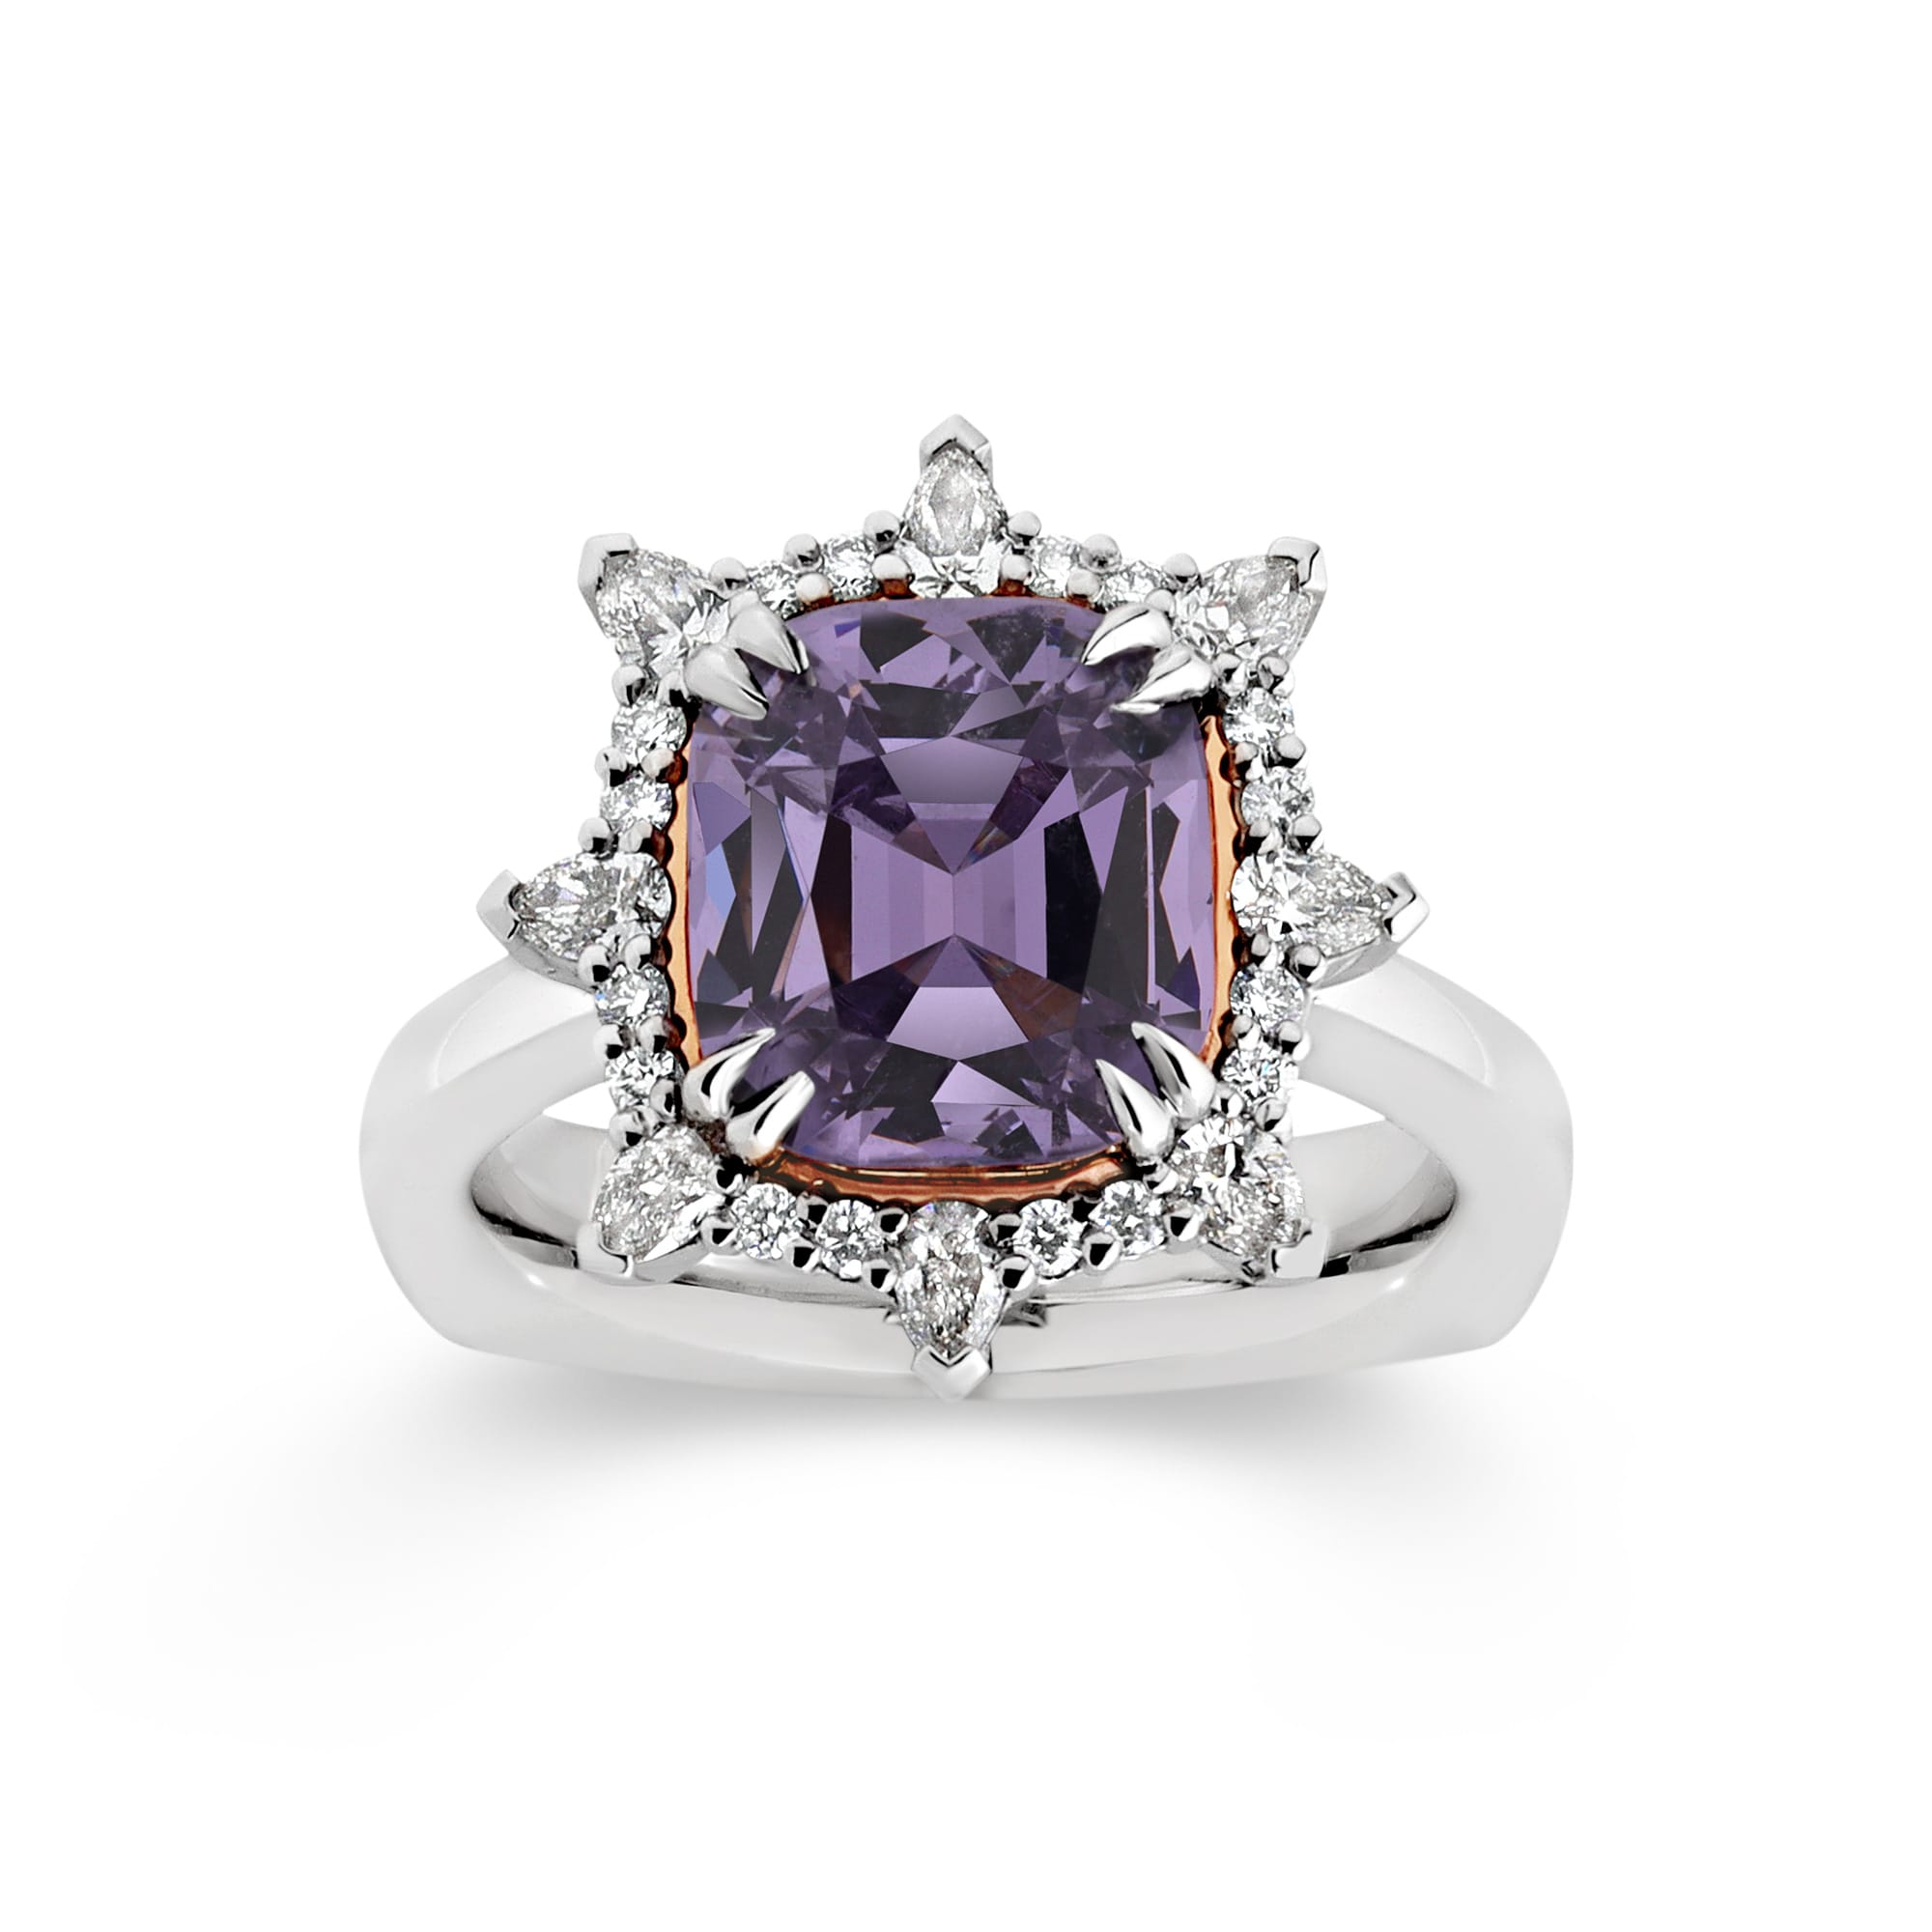 Alexandra features a 3.74 carat fusion cut Lavender Spinel centre gemstone. The centre stone sits upon a rose gold cradle and is encased with a diamond halo crown. She was designed and handcrafted by LeGassick's Master Jewellers, Gold Coast, Australia.